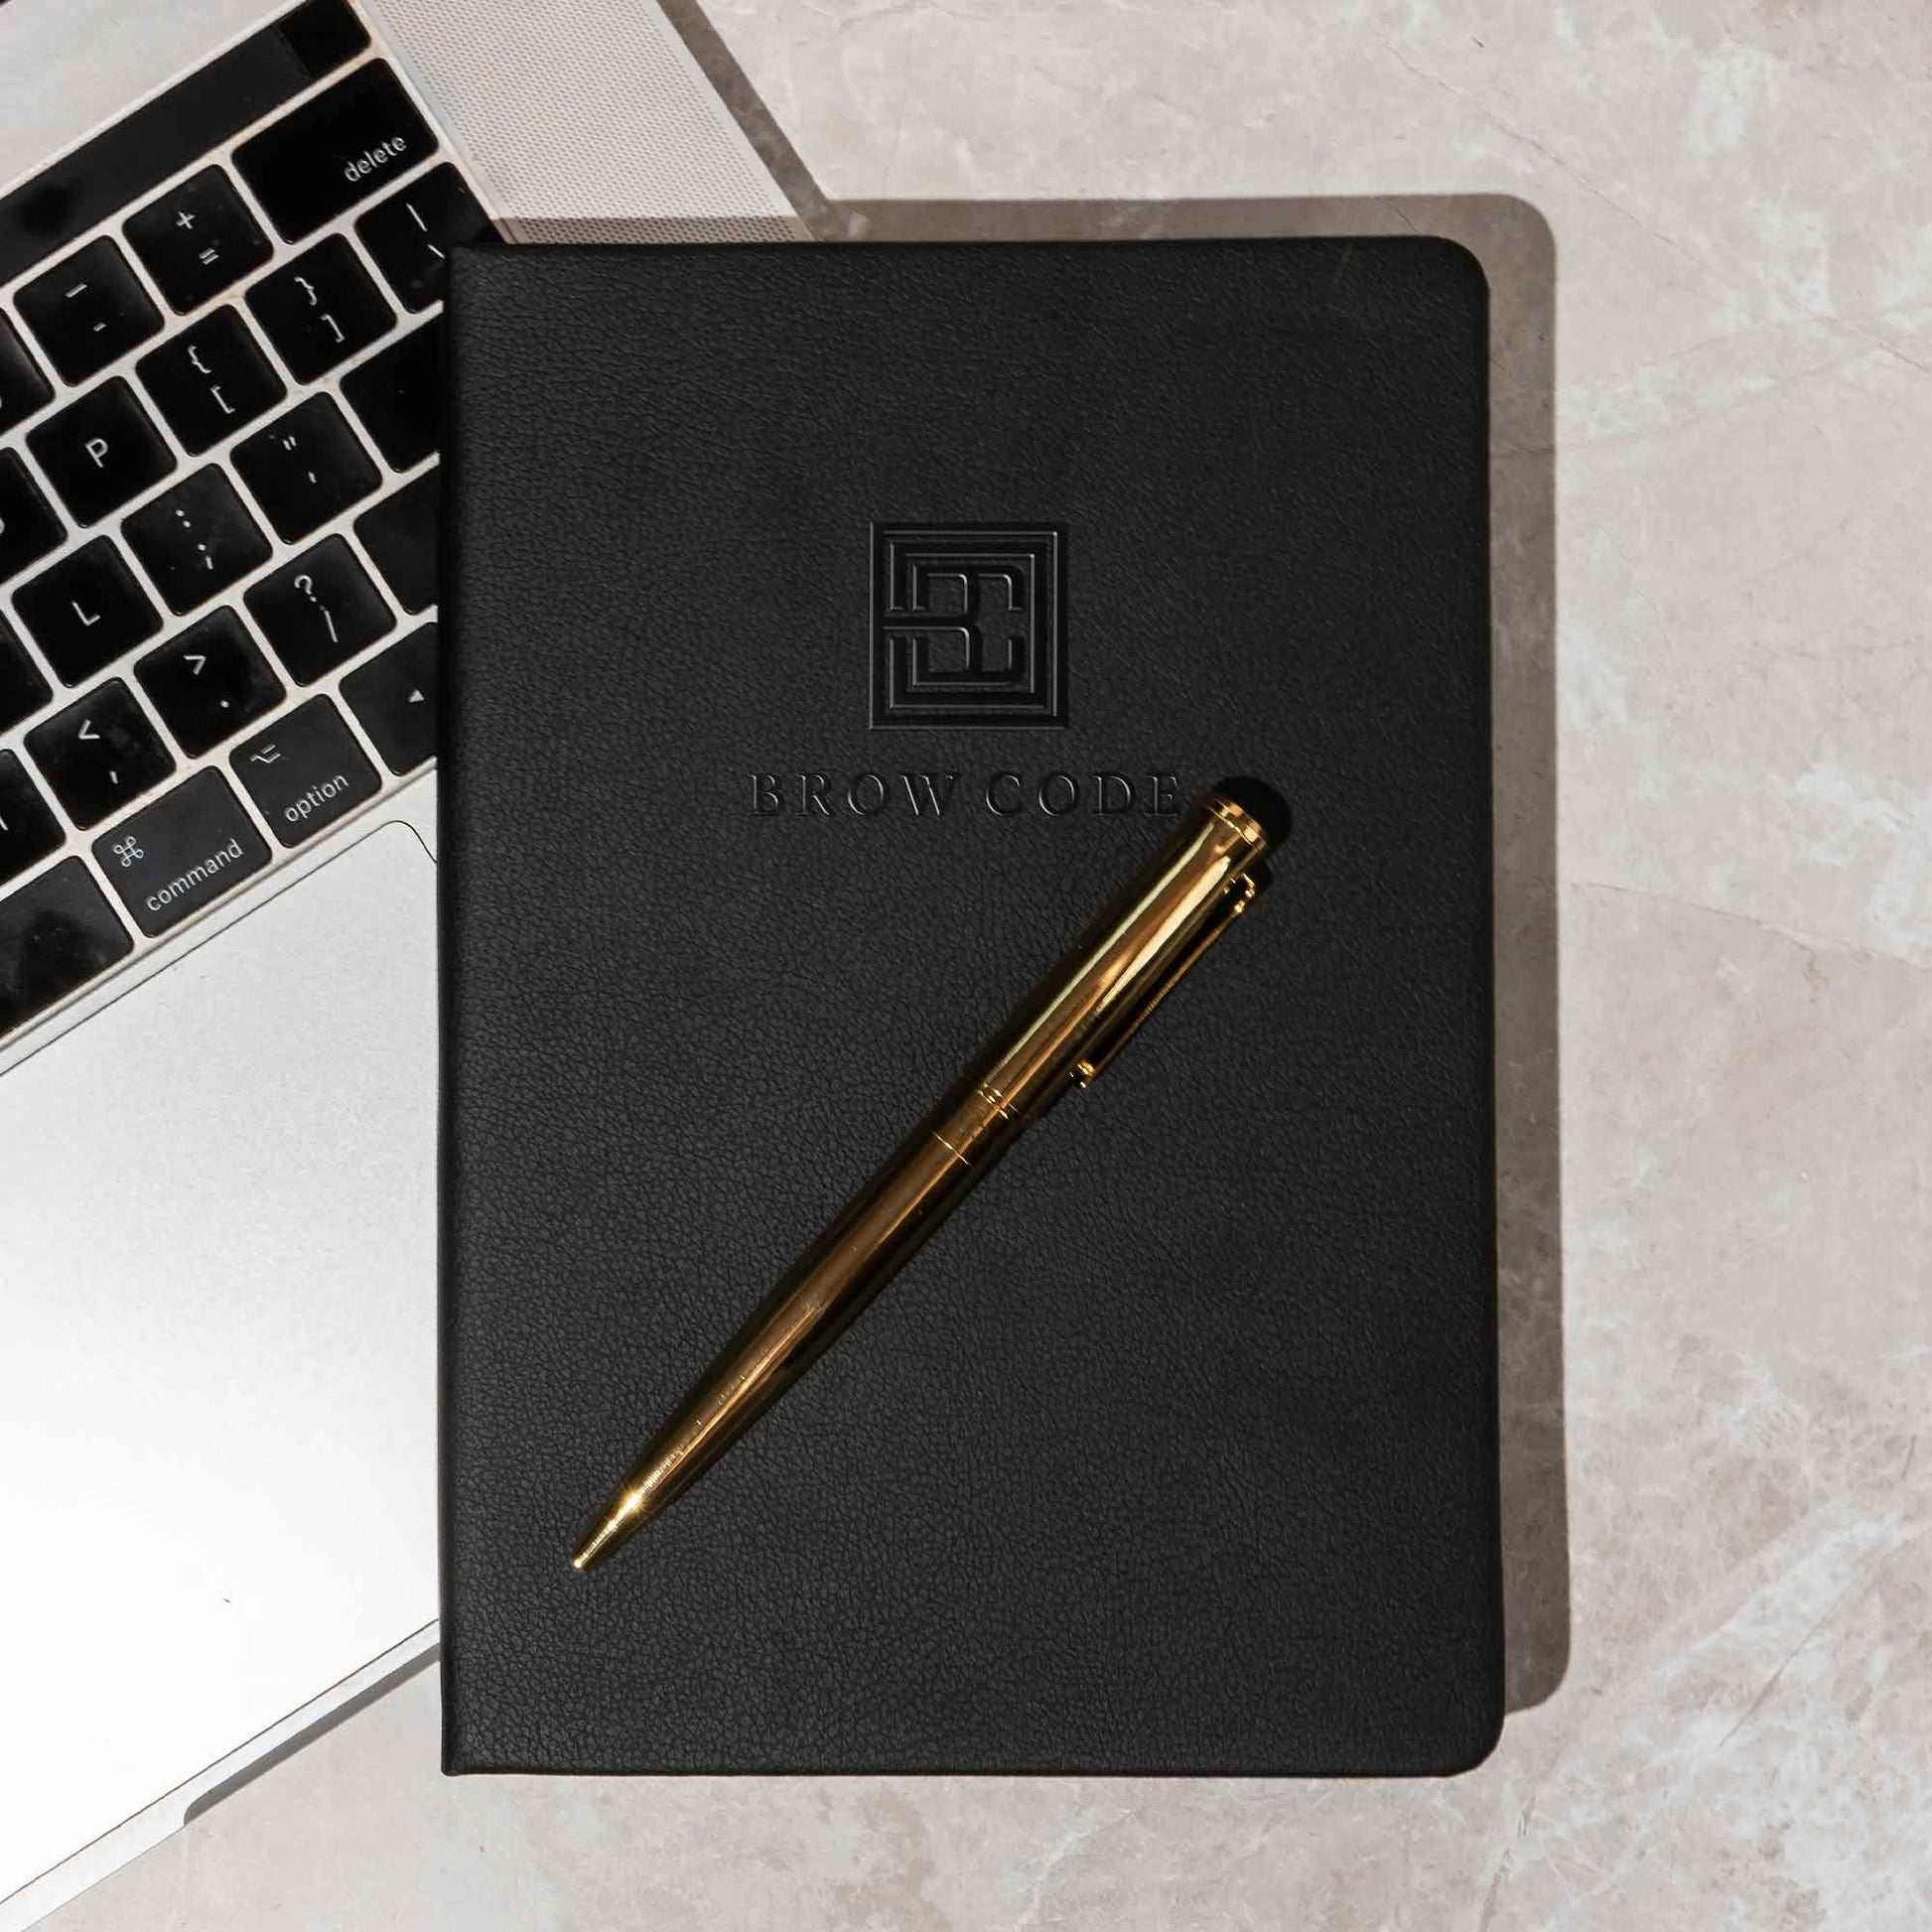 Brow Code Gold Pen and PLanner